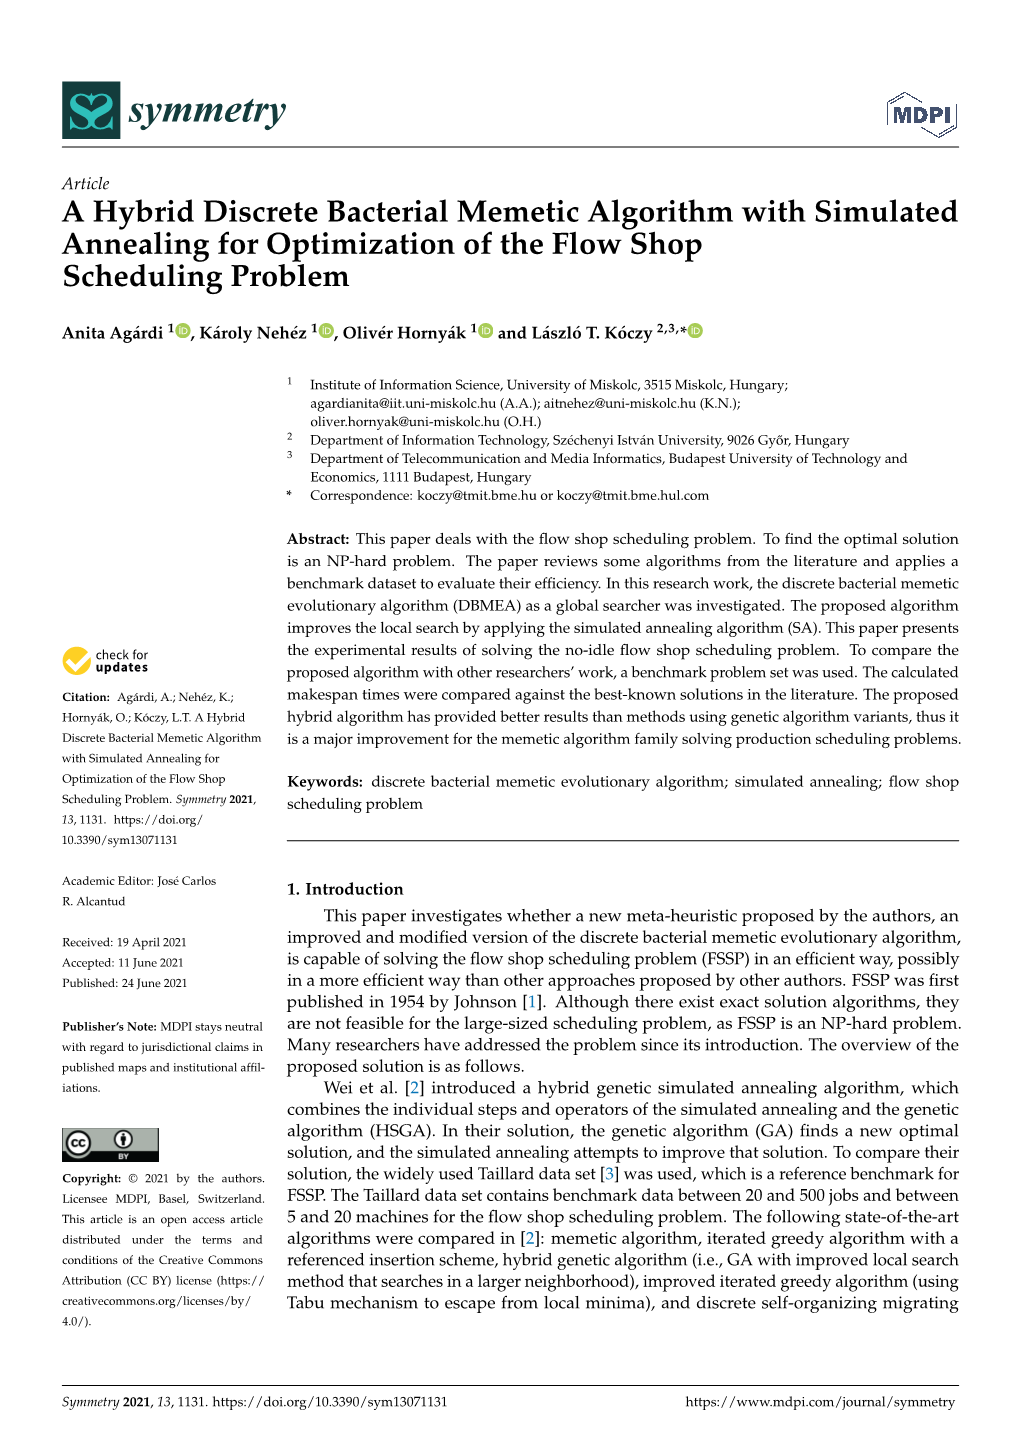 A Hybrid Discrete Bacterial Memetic Algorithm with Simulated Annealing for Optimization of the Flow Shop Scheduling Problem